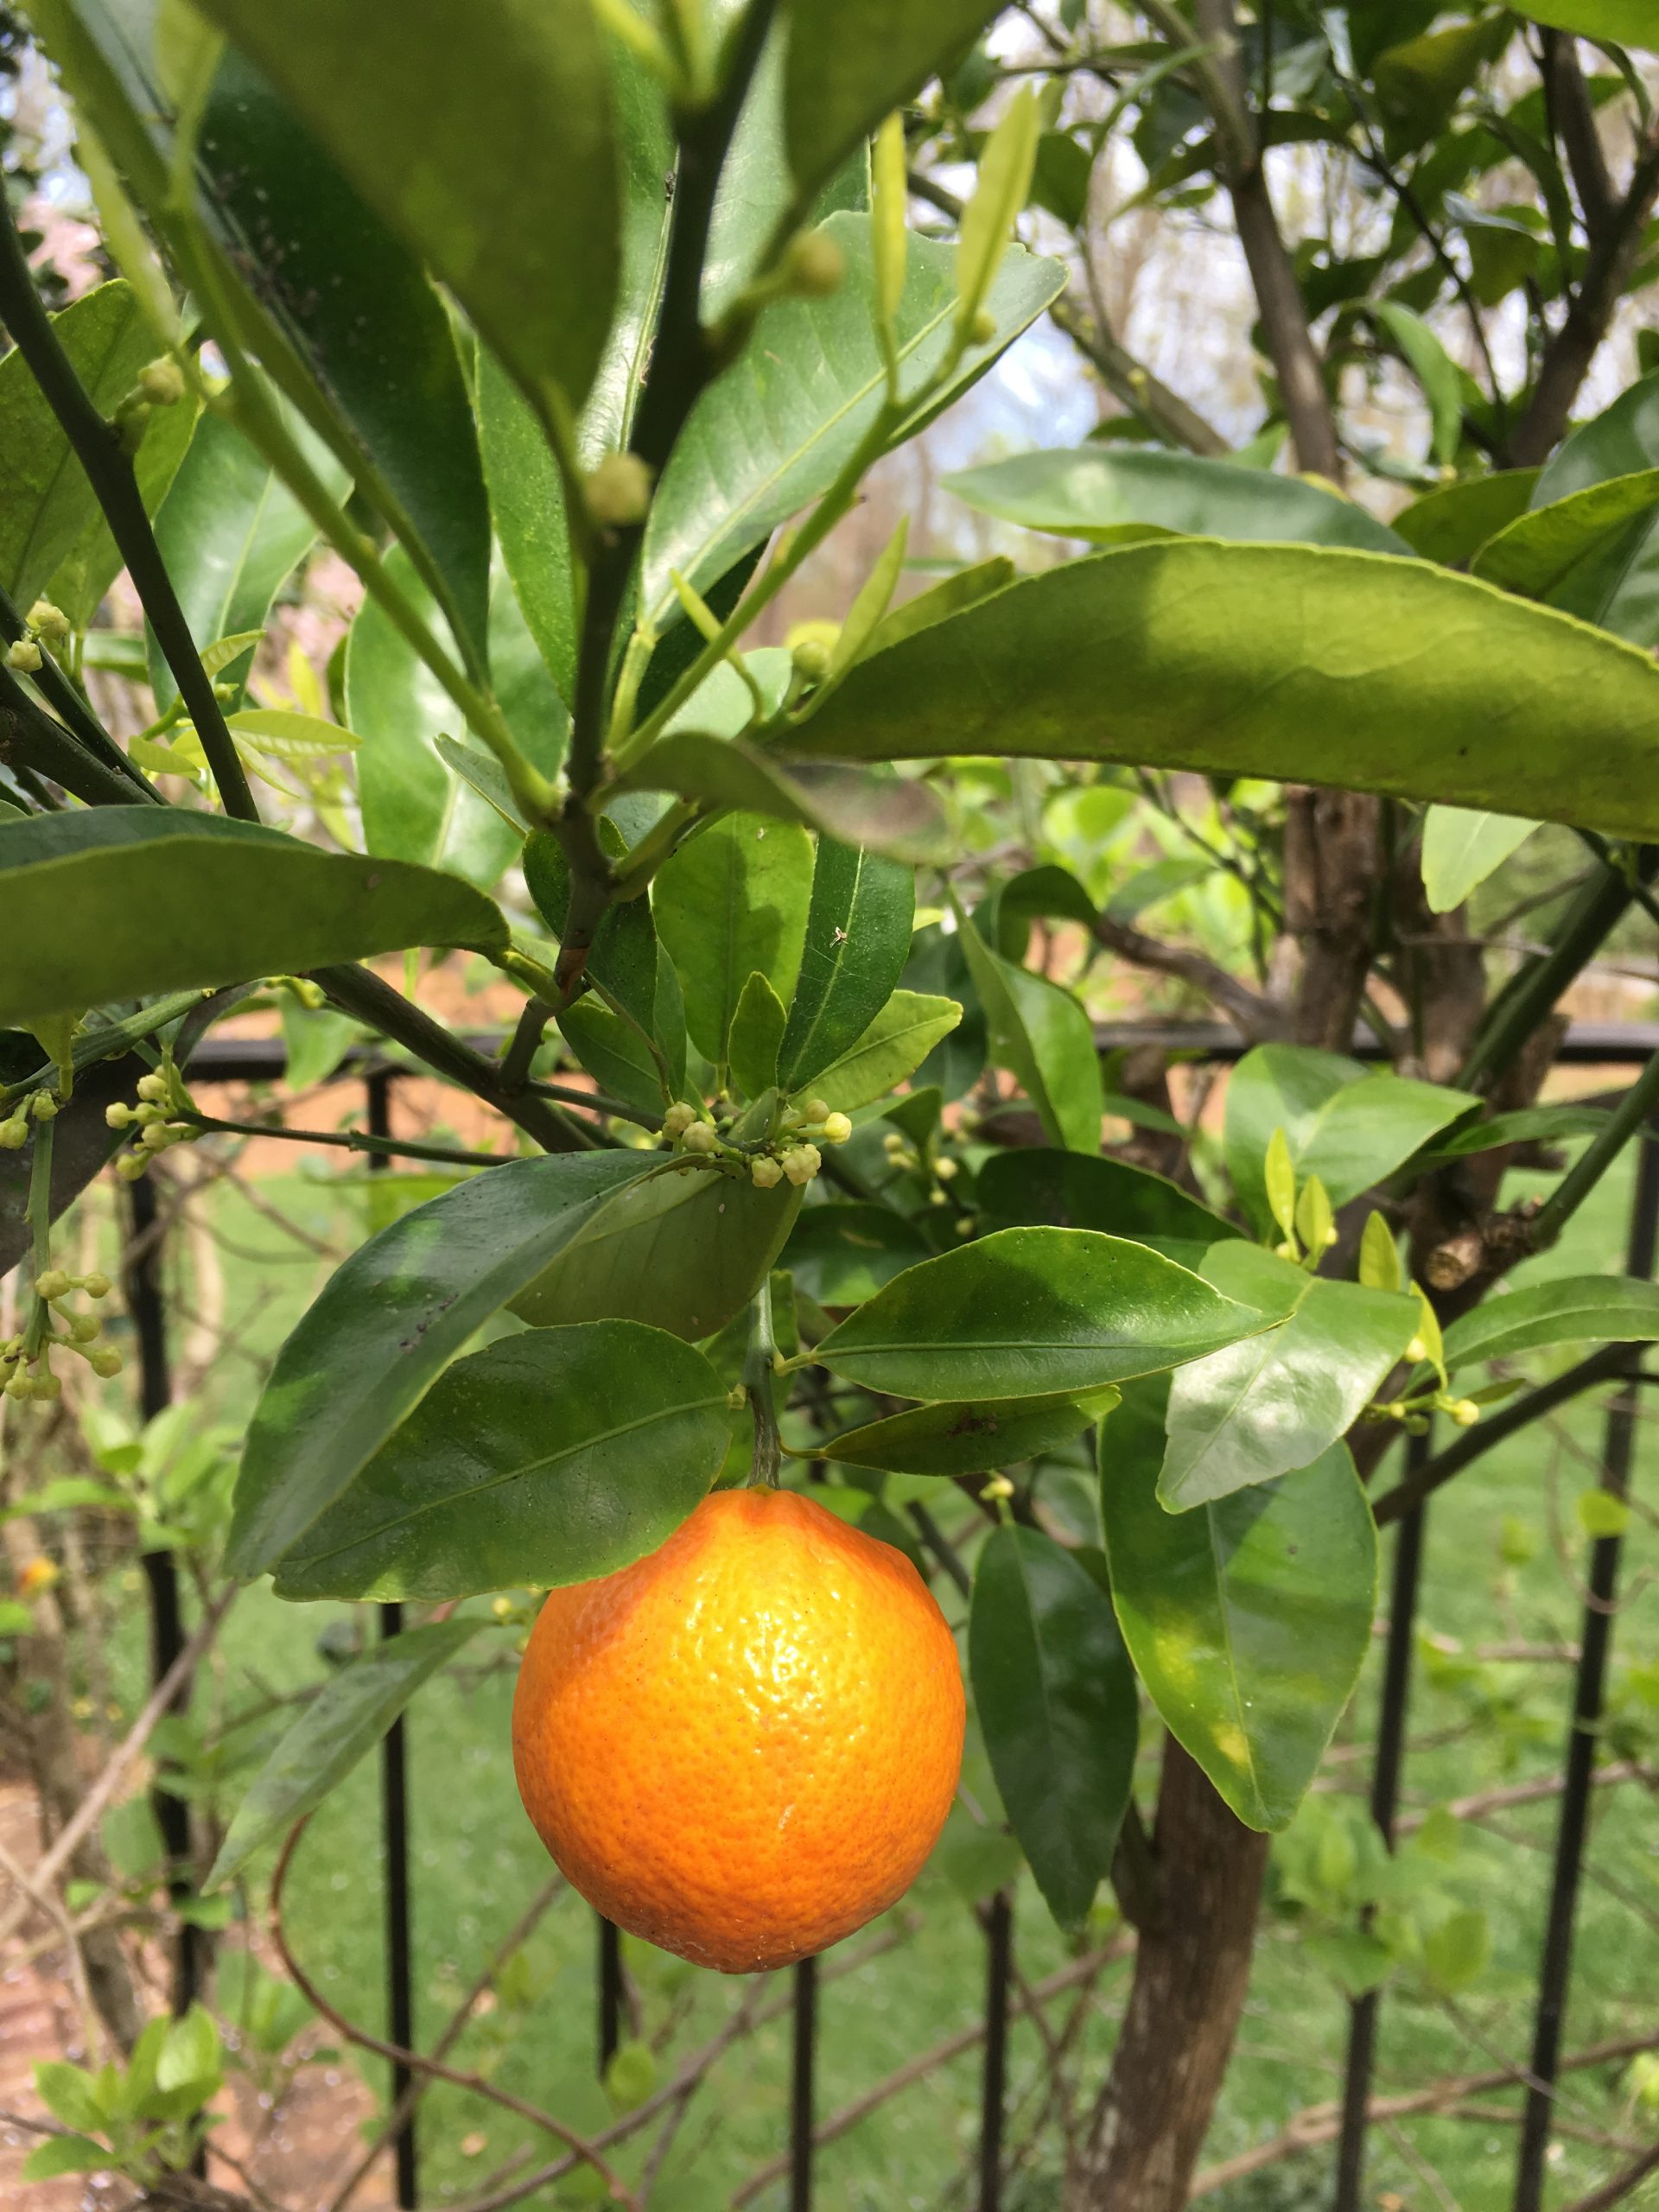 Growing Fruit Trees from Pits and Seeds